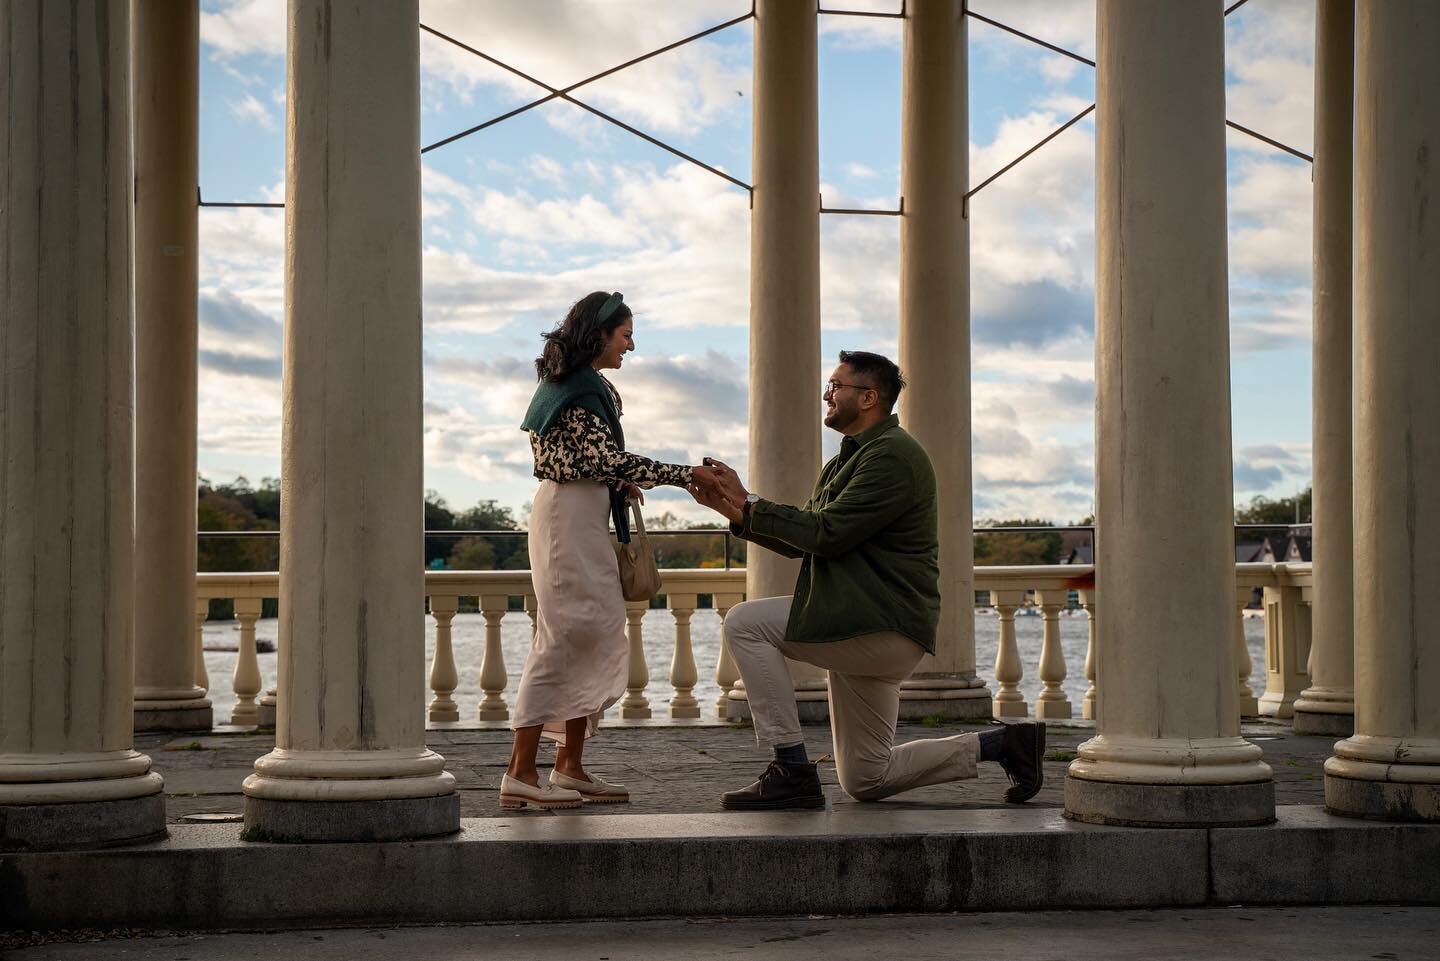 A HUGE congratulations to my friends @akashkanneganti @kinari_patel 🍾💍
You guys were great to work with and I hope you have the BEST time on your trip. So happy for you both!!!! And special thanks for the fabulous help (and comedic relief) as alway